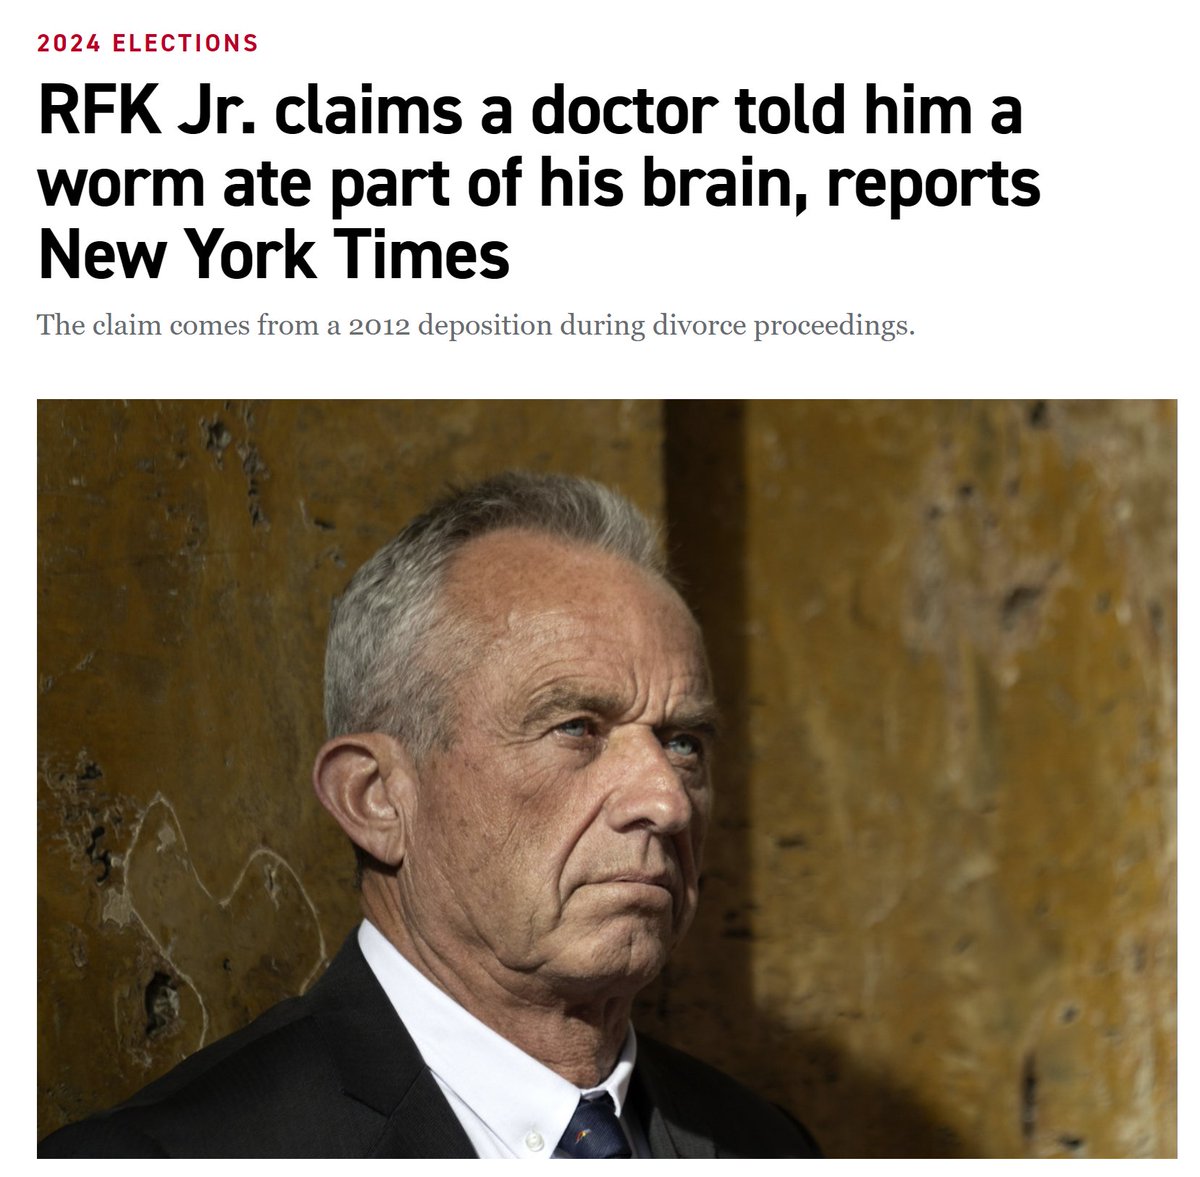 RFK Jr's brain is so toxic, a worm crawled in there, ate a piece of it, and died. 2024 is wild, y'all.